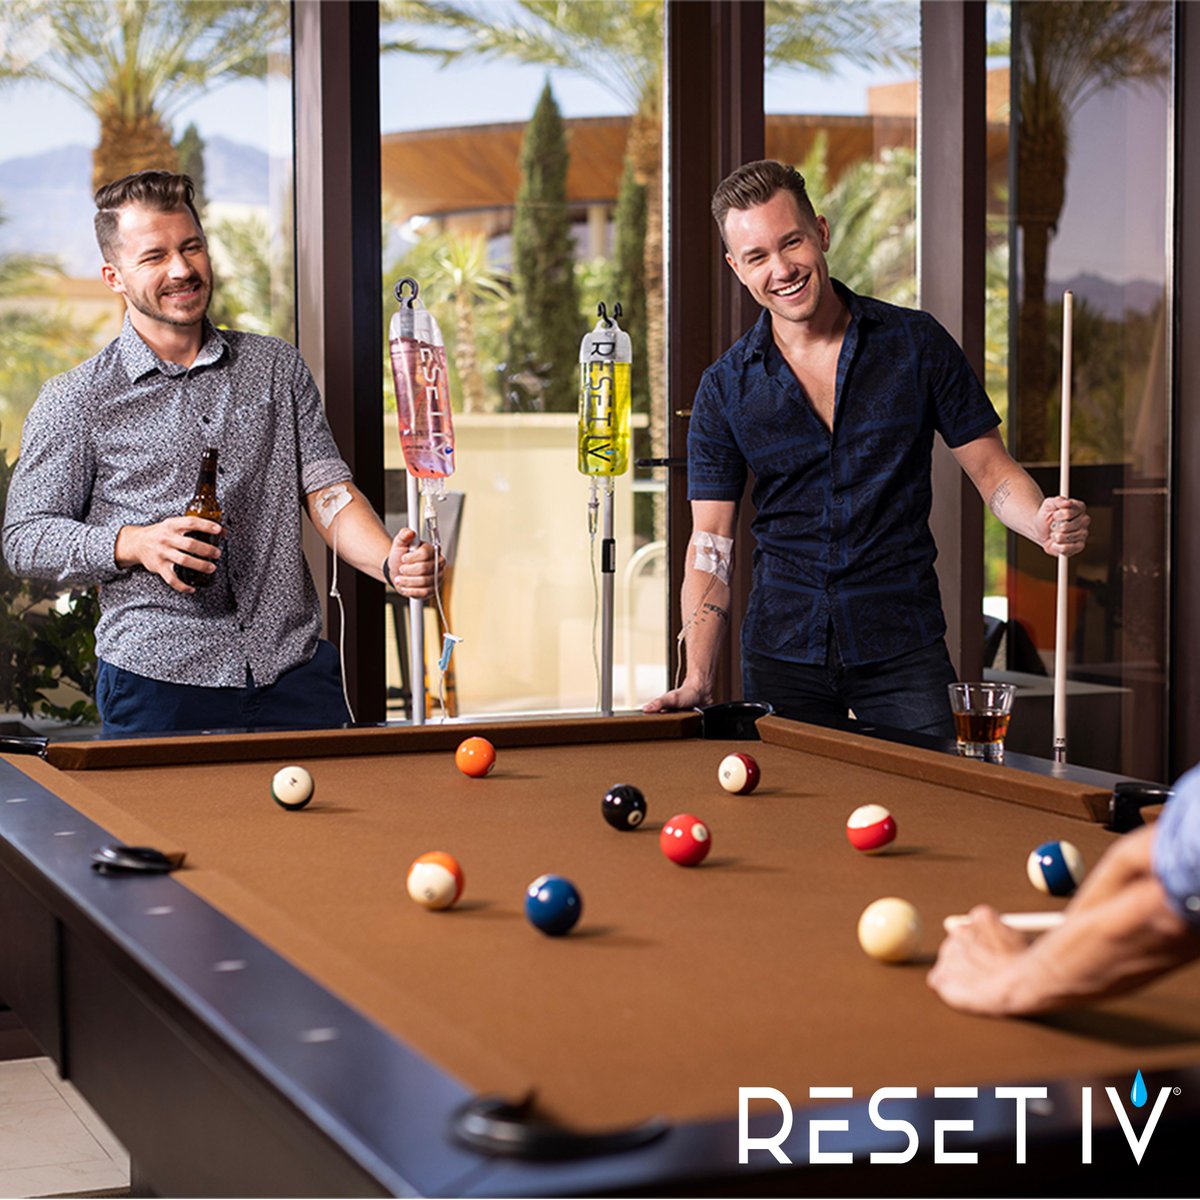 Reset IV can help you get back to your best self, with on-demand IV therapy services from their team of professional nurses at Resorts World Las Vegas. Whether it&#39;s a migraine, jetlag or immune boost—Reset IV can customize your IV therapy program.